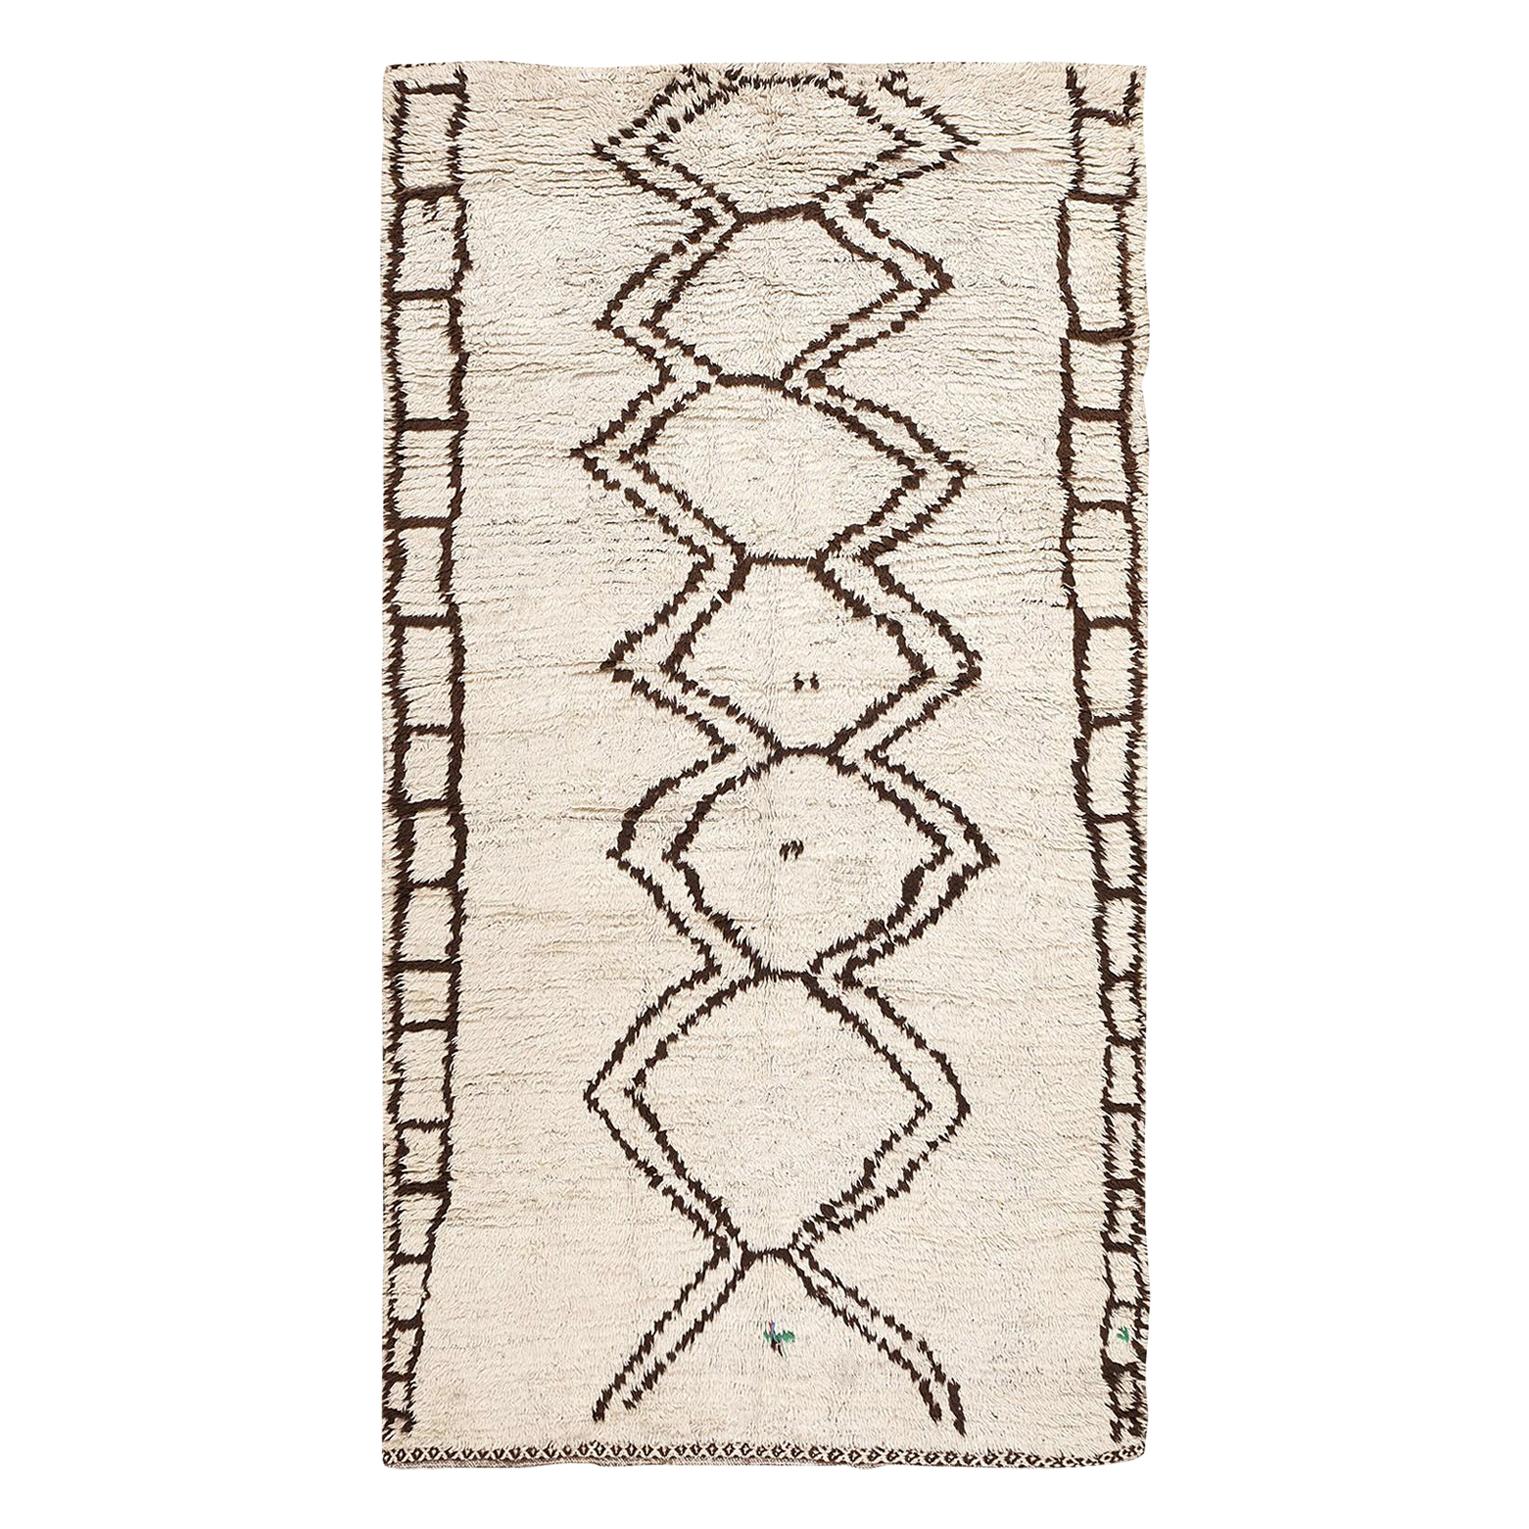 Moroccan Beni Ourain Berber Rug. Size: 4 ft 3 in x 8 ft For Sale